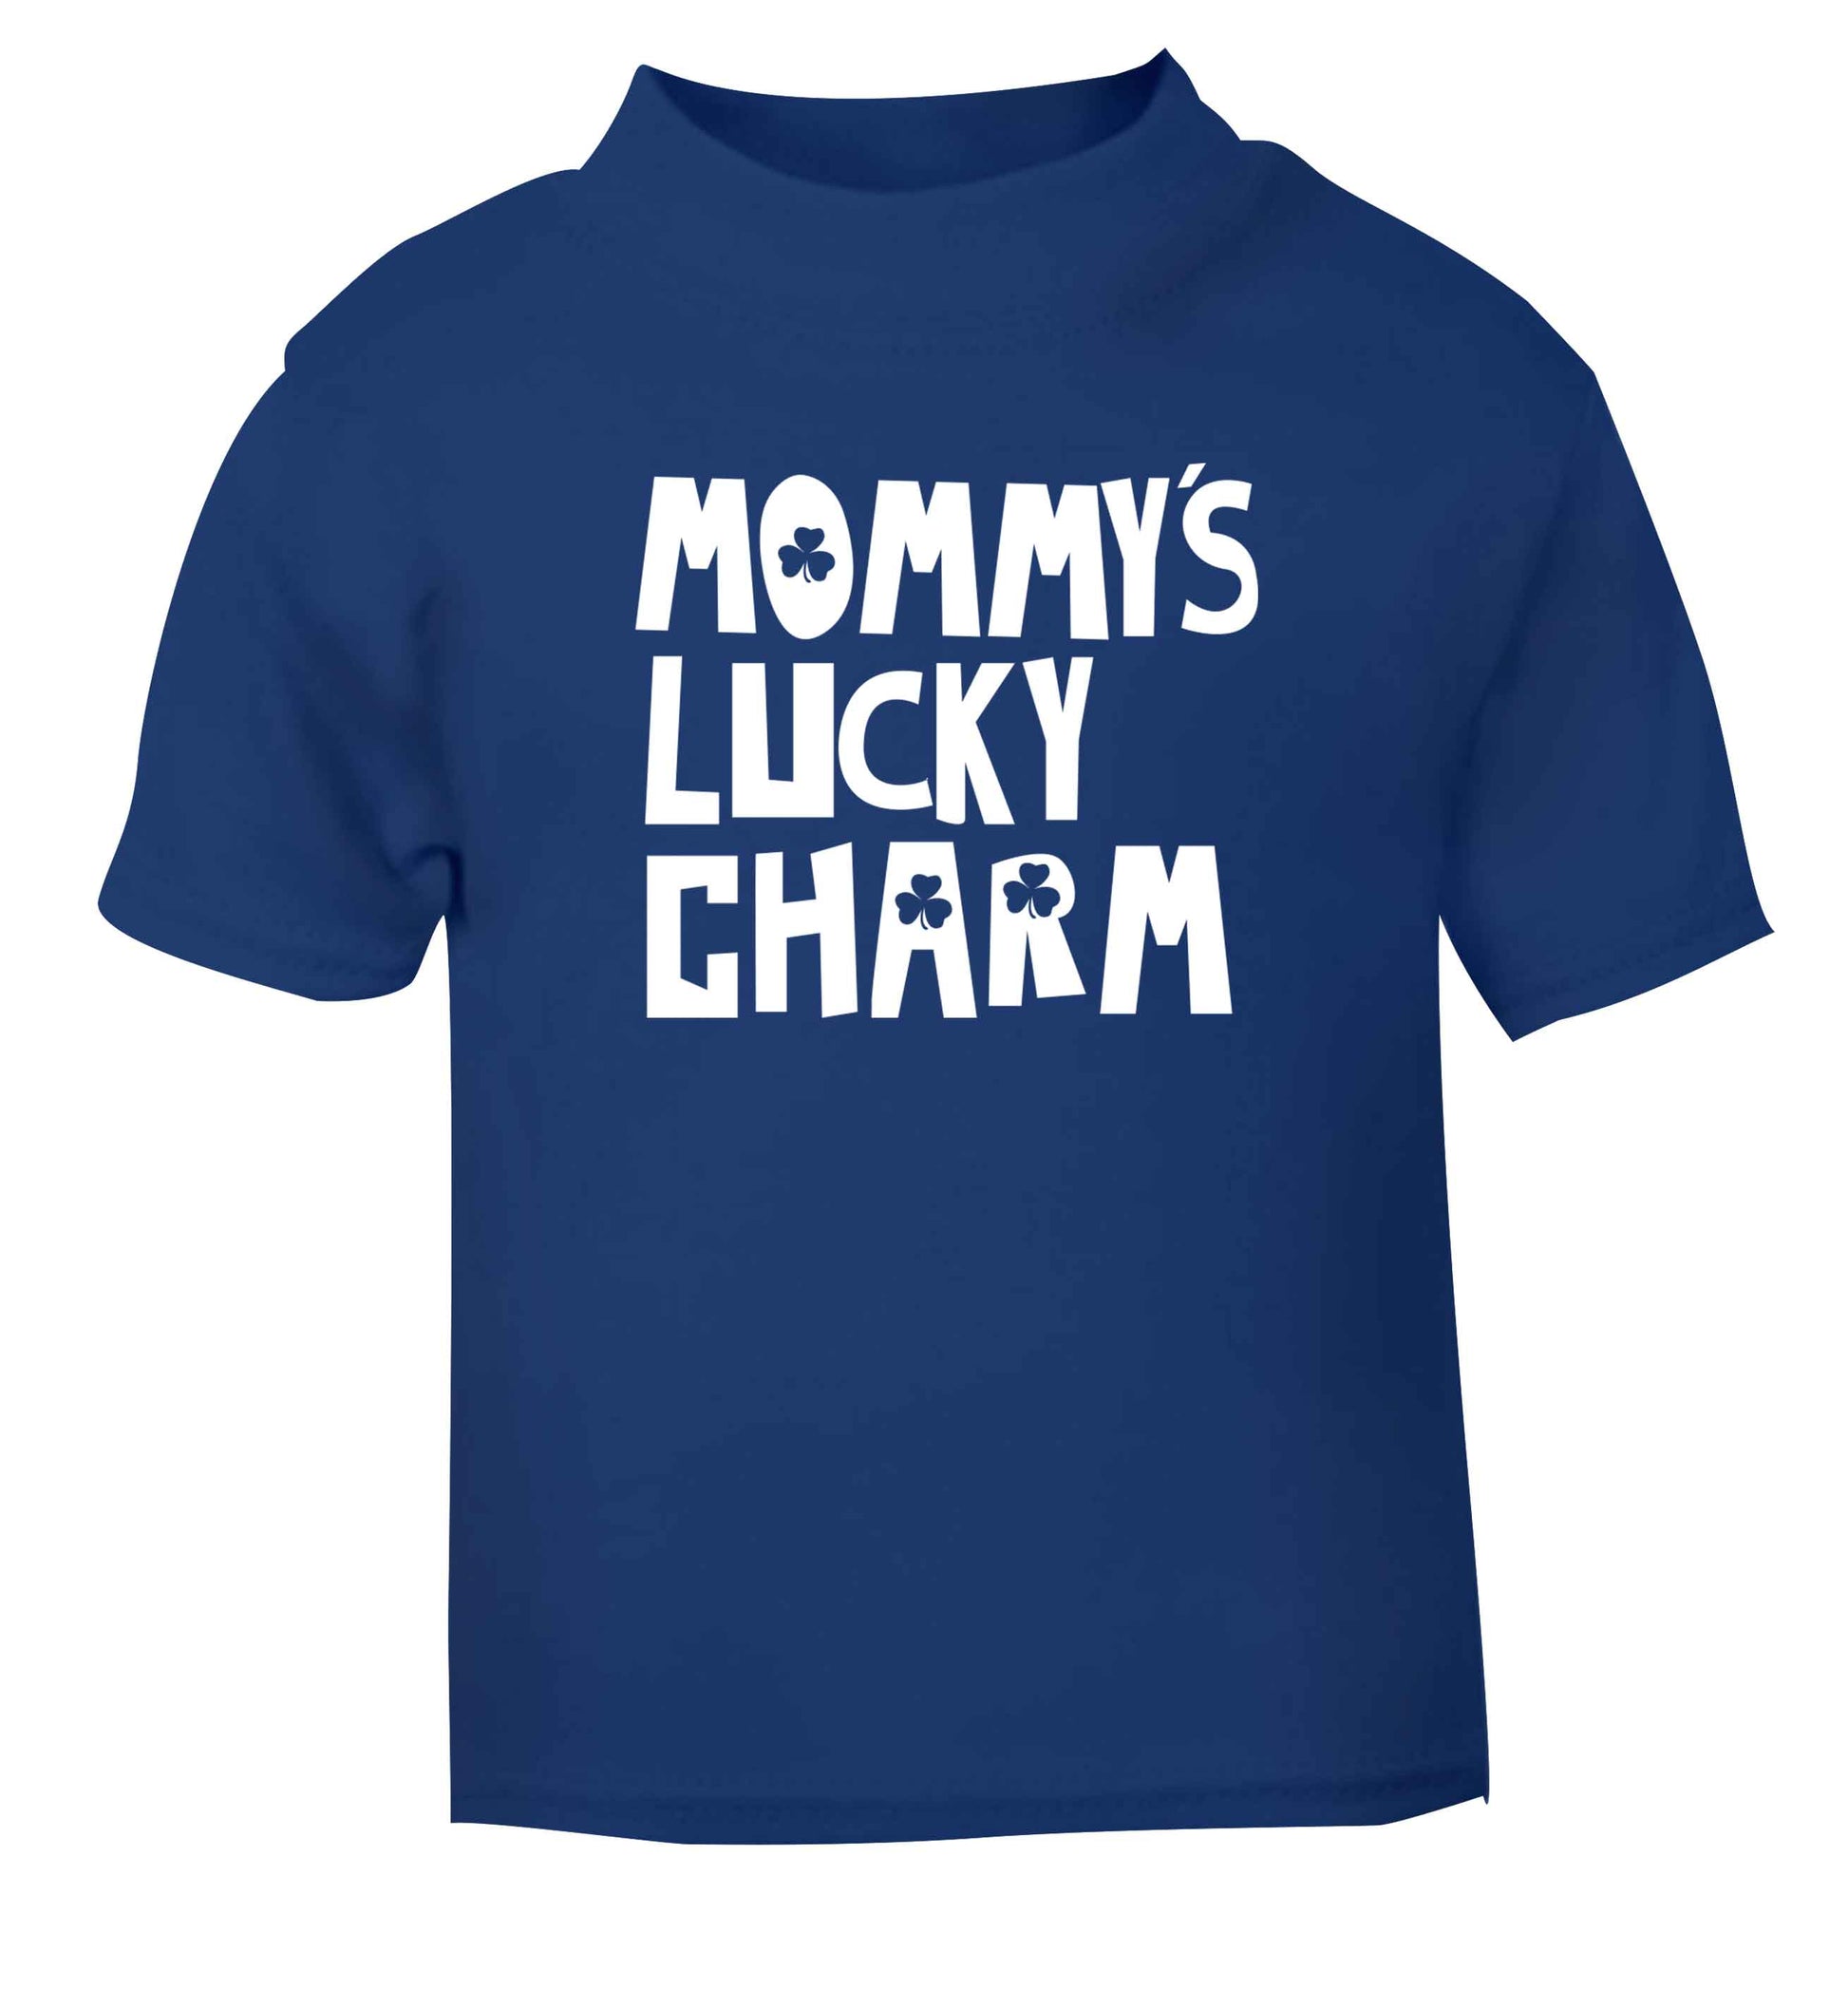 Mommy's lucky charm blue baby toddler Tshirt 2 Years